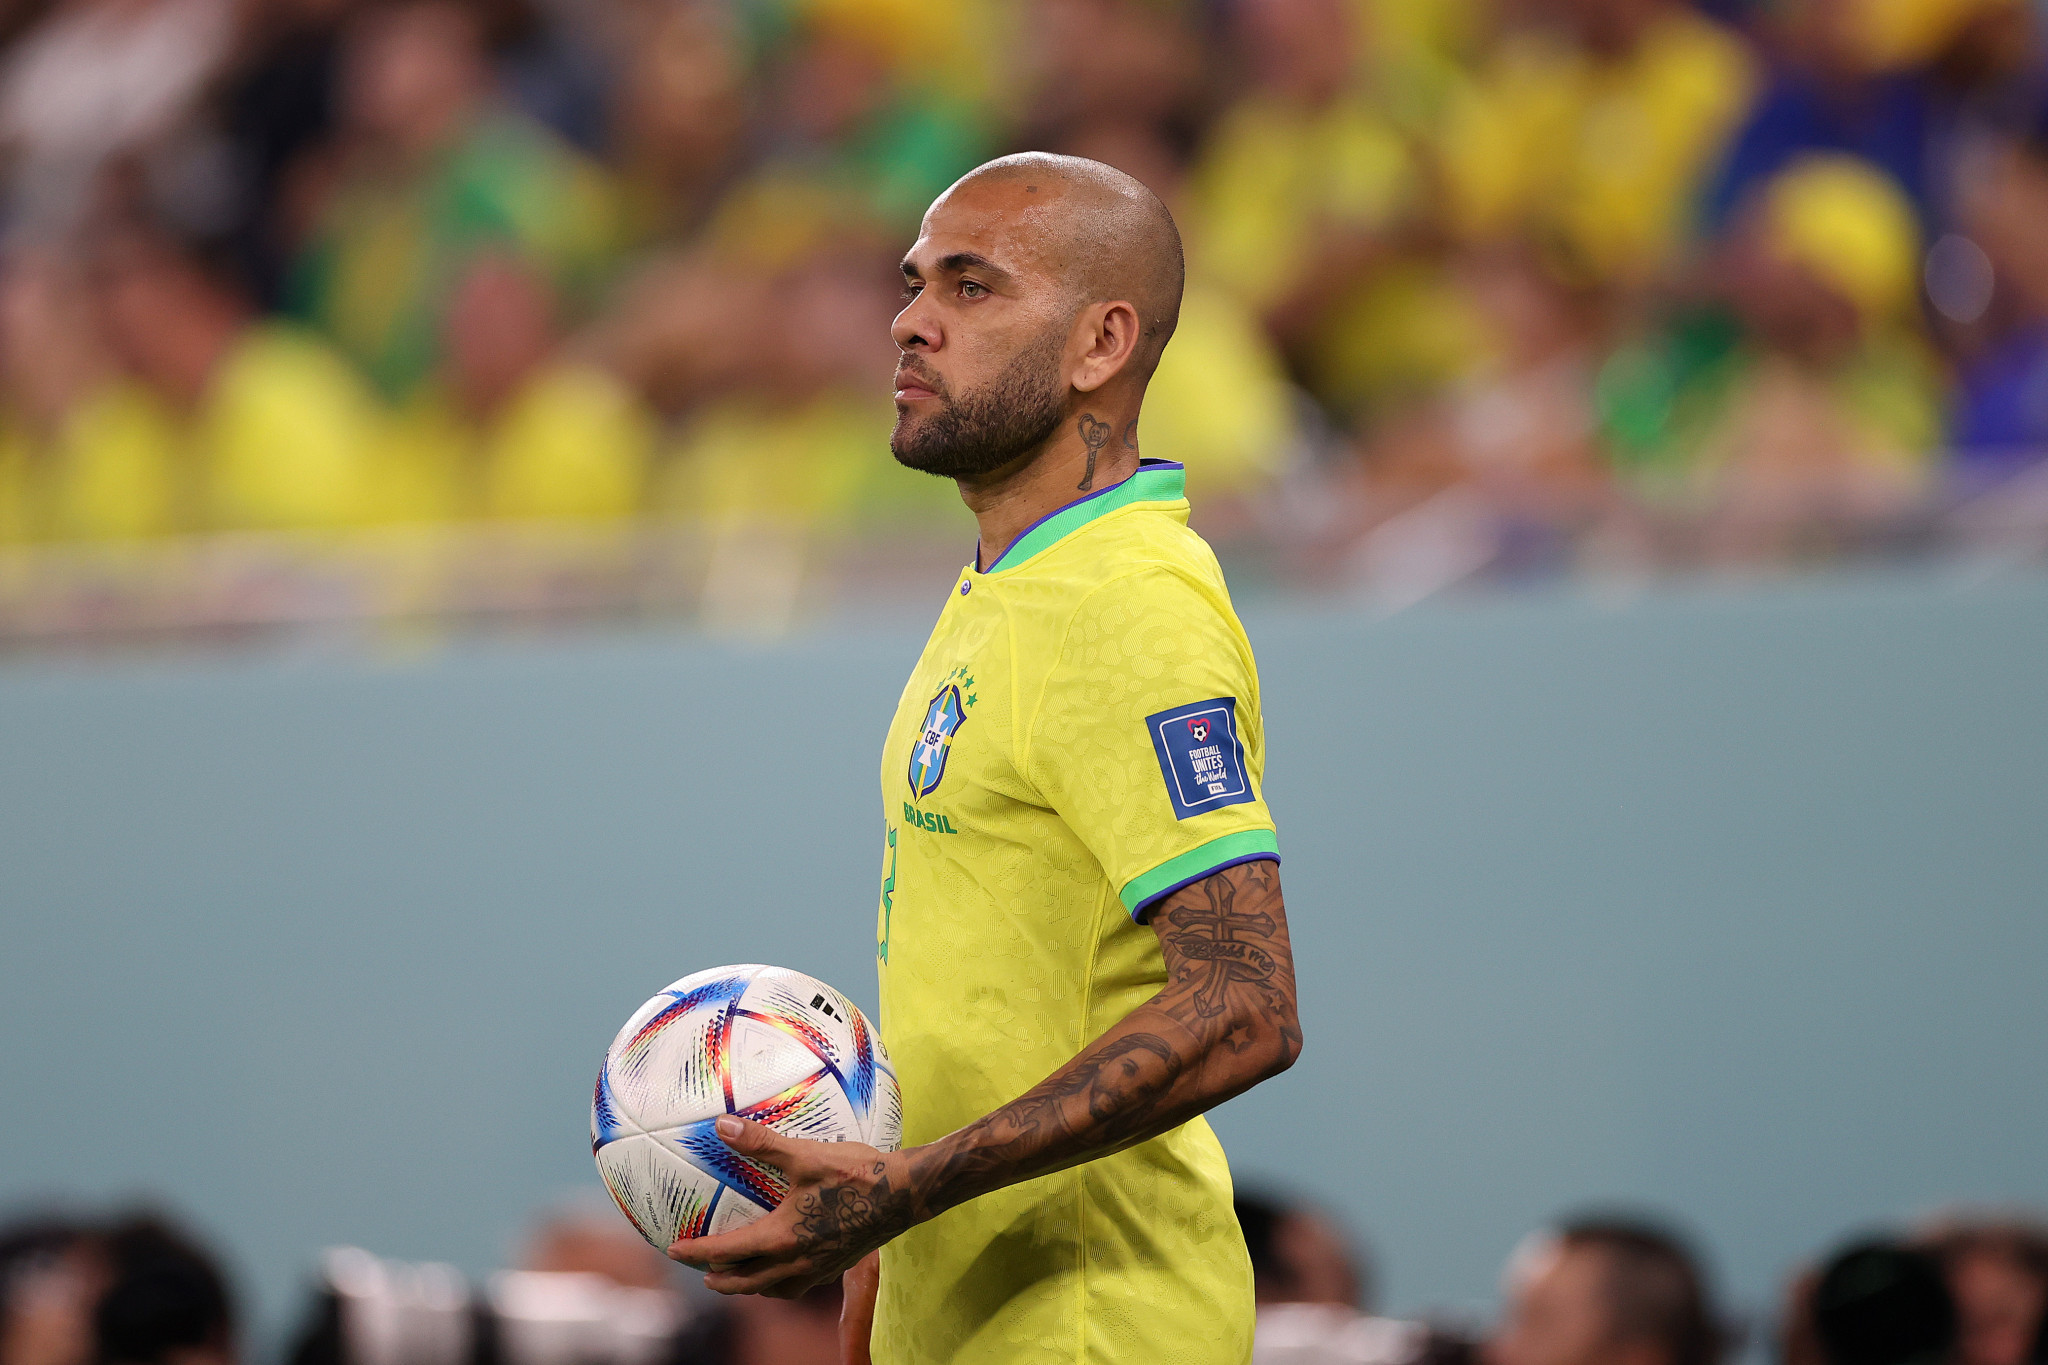 Brazil defender Alves remanded in custody on sexual assault charge